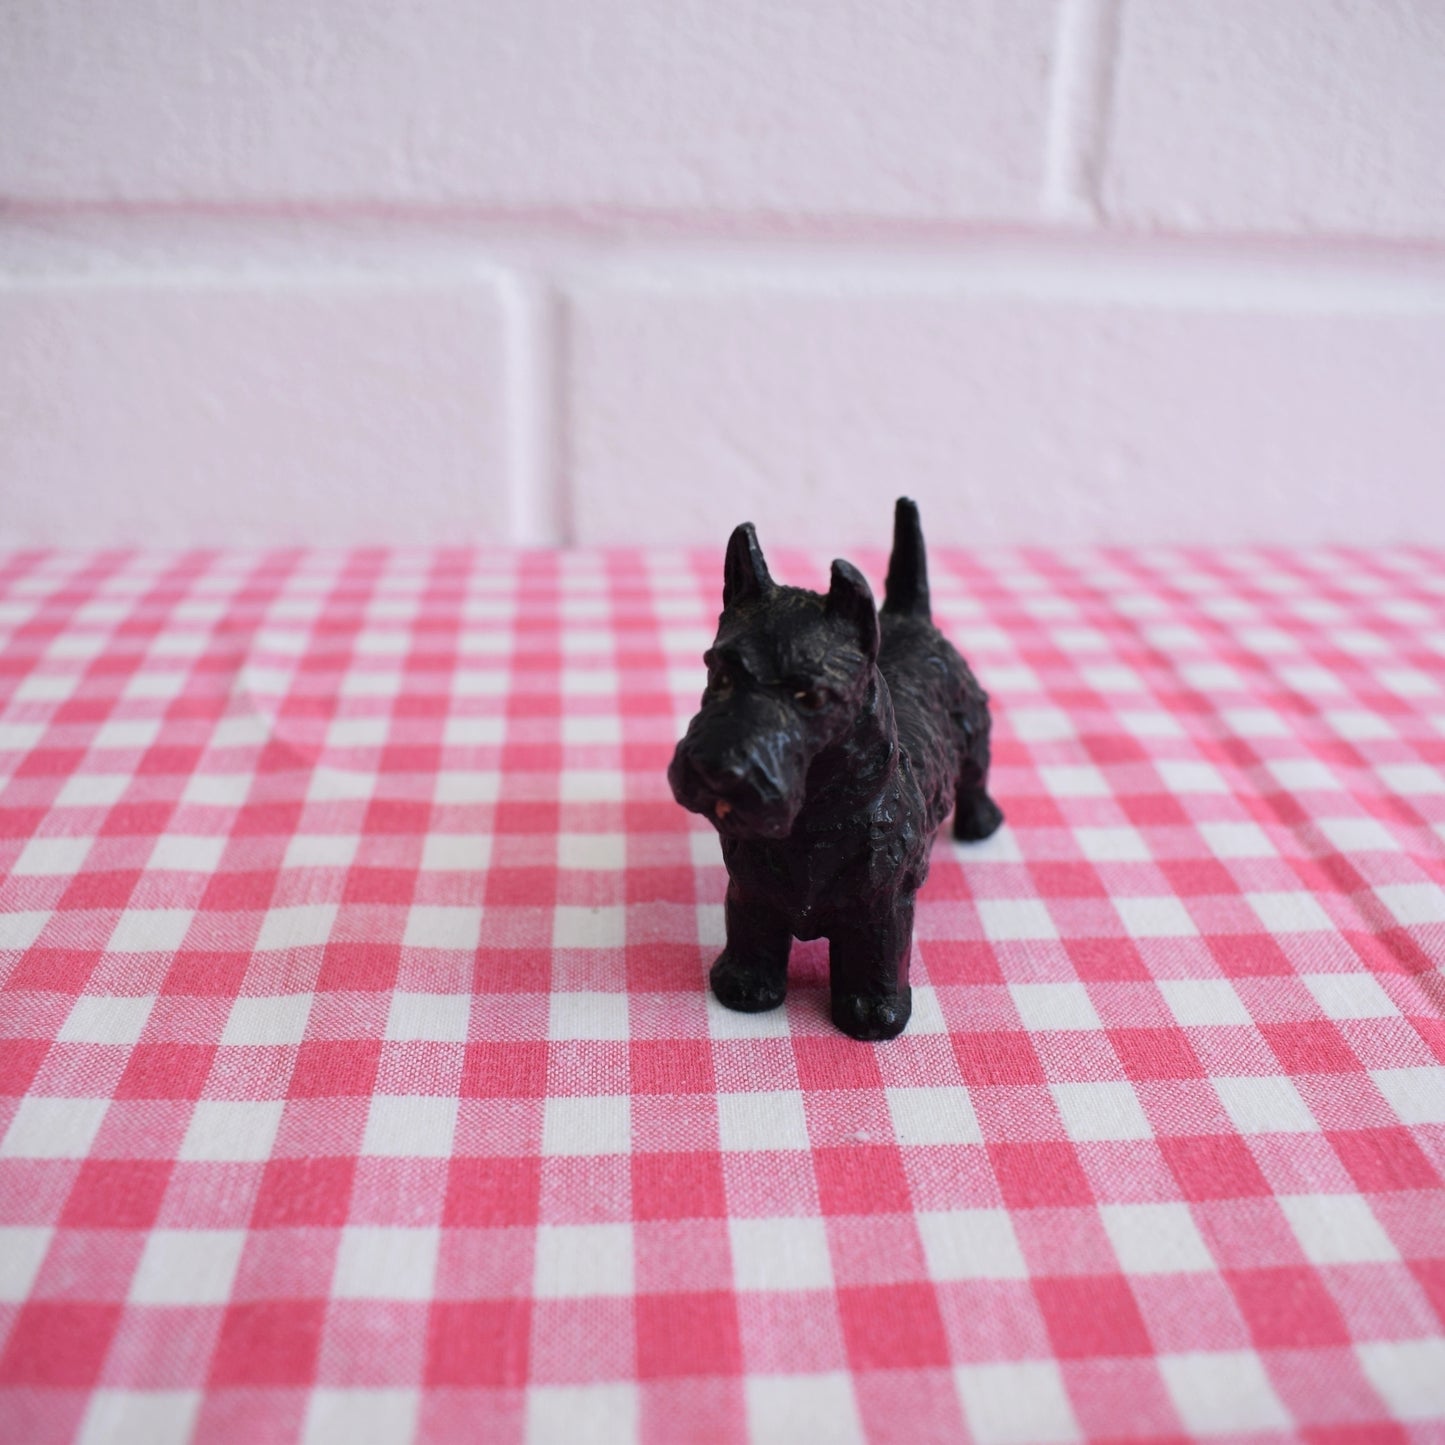 Vintage 1940s Small Metal Scotty Dog / Plastic Terrier